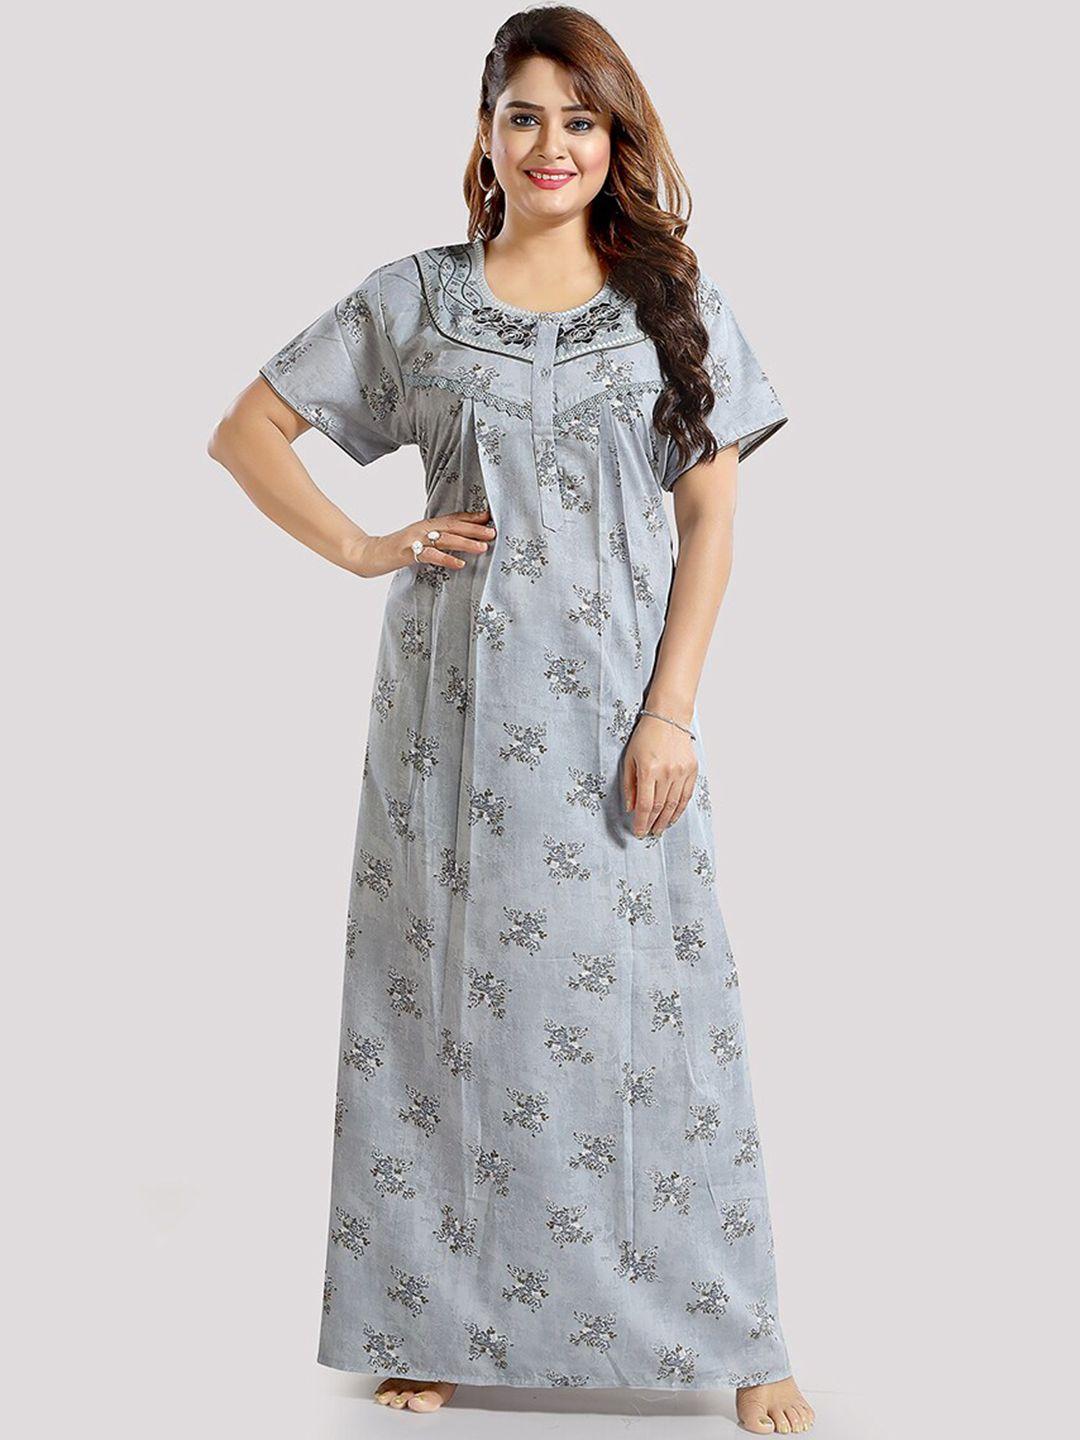 be-you-floral-printed-maxi-nightdress